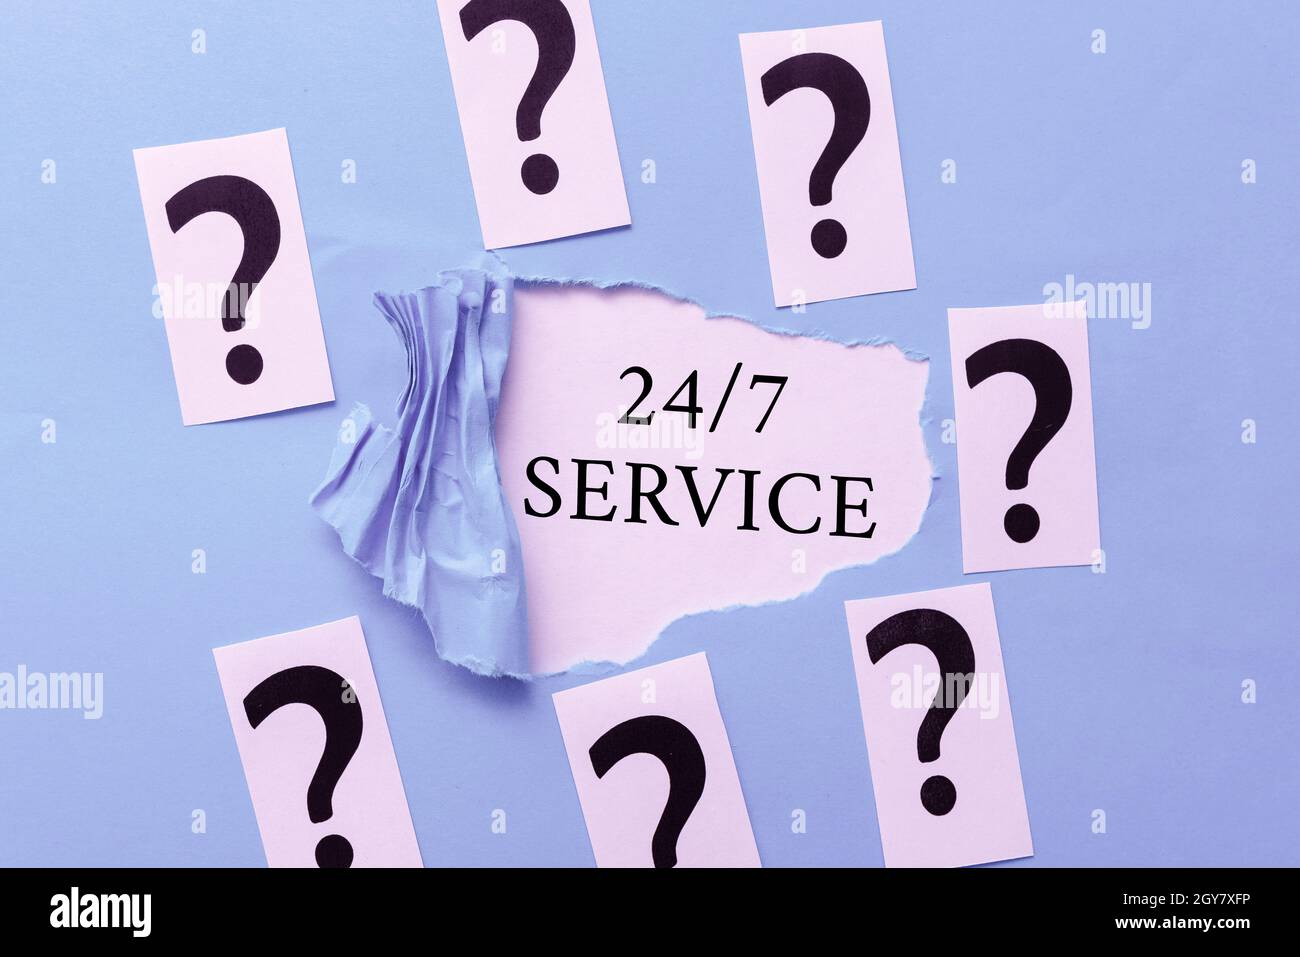 Text sign showing 24 on 7 Service, Conceptual photo providing an assistance that is available all the time Brainstorming New Ideas And Inspiration For Stock Photo